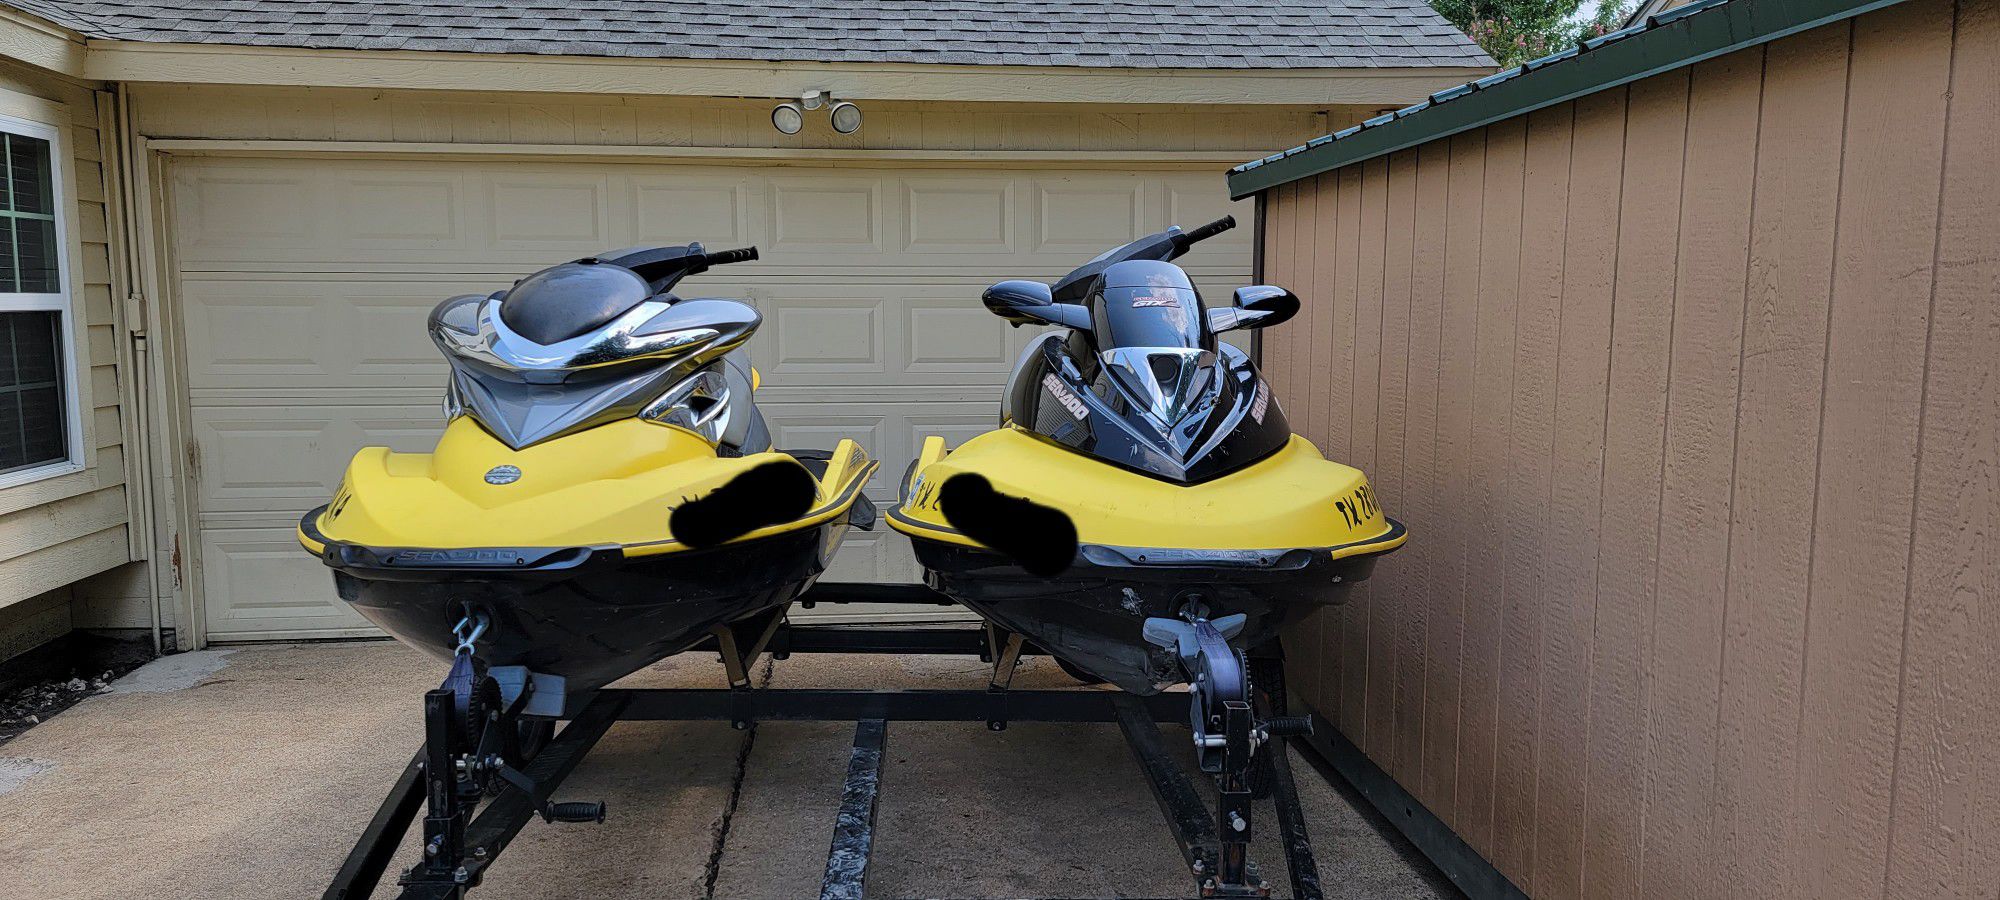 Super Charged Jet Skis For Sale